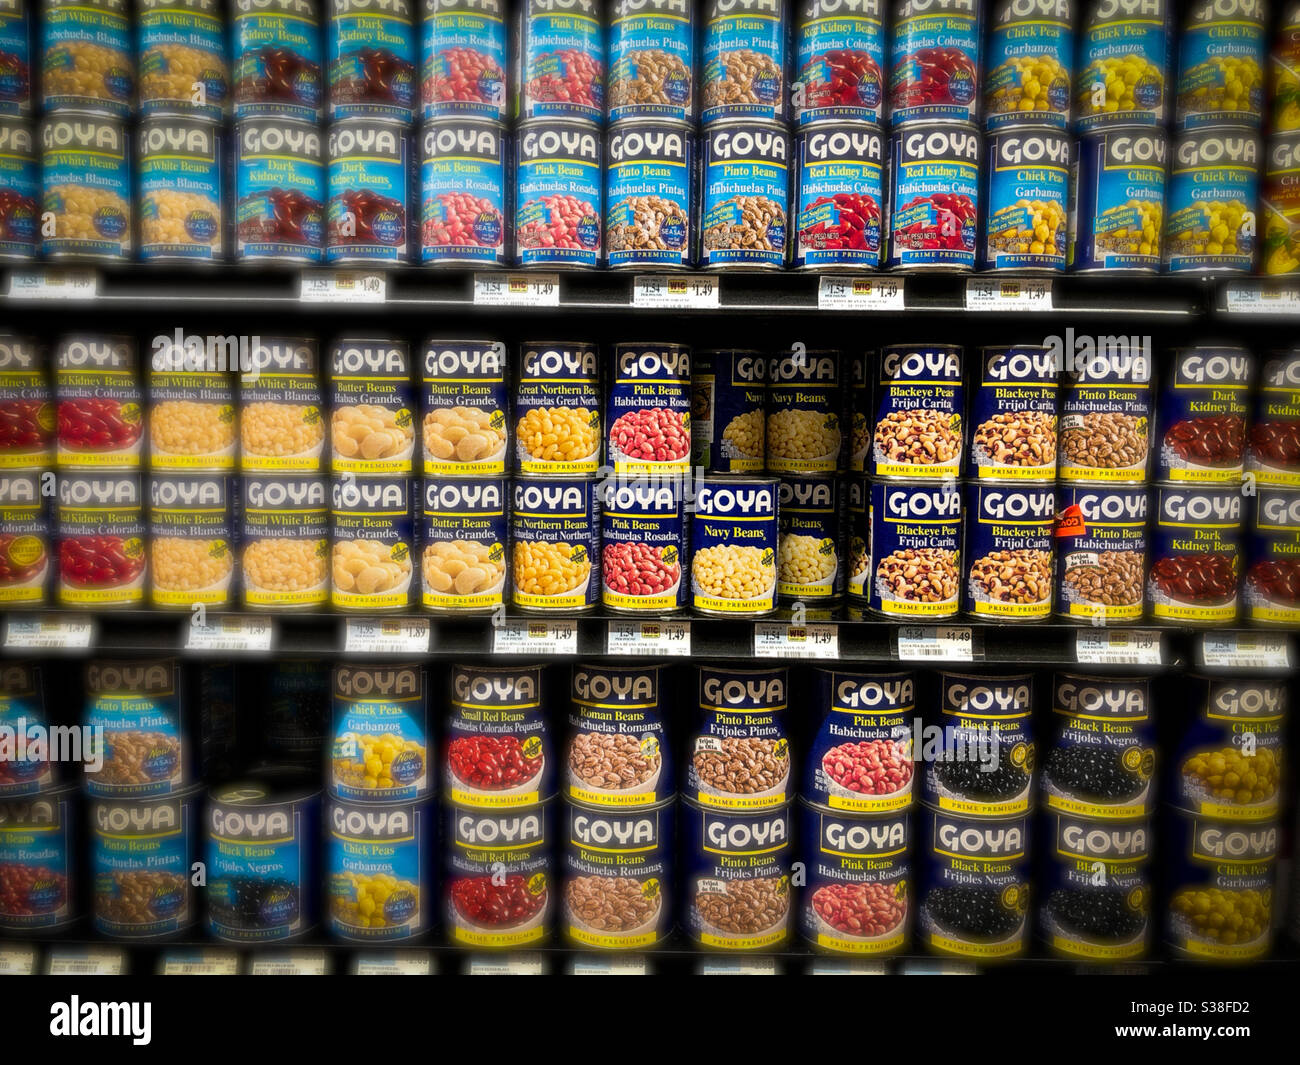 Cans of Goya products at the supermarket Stock Photo